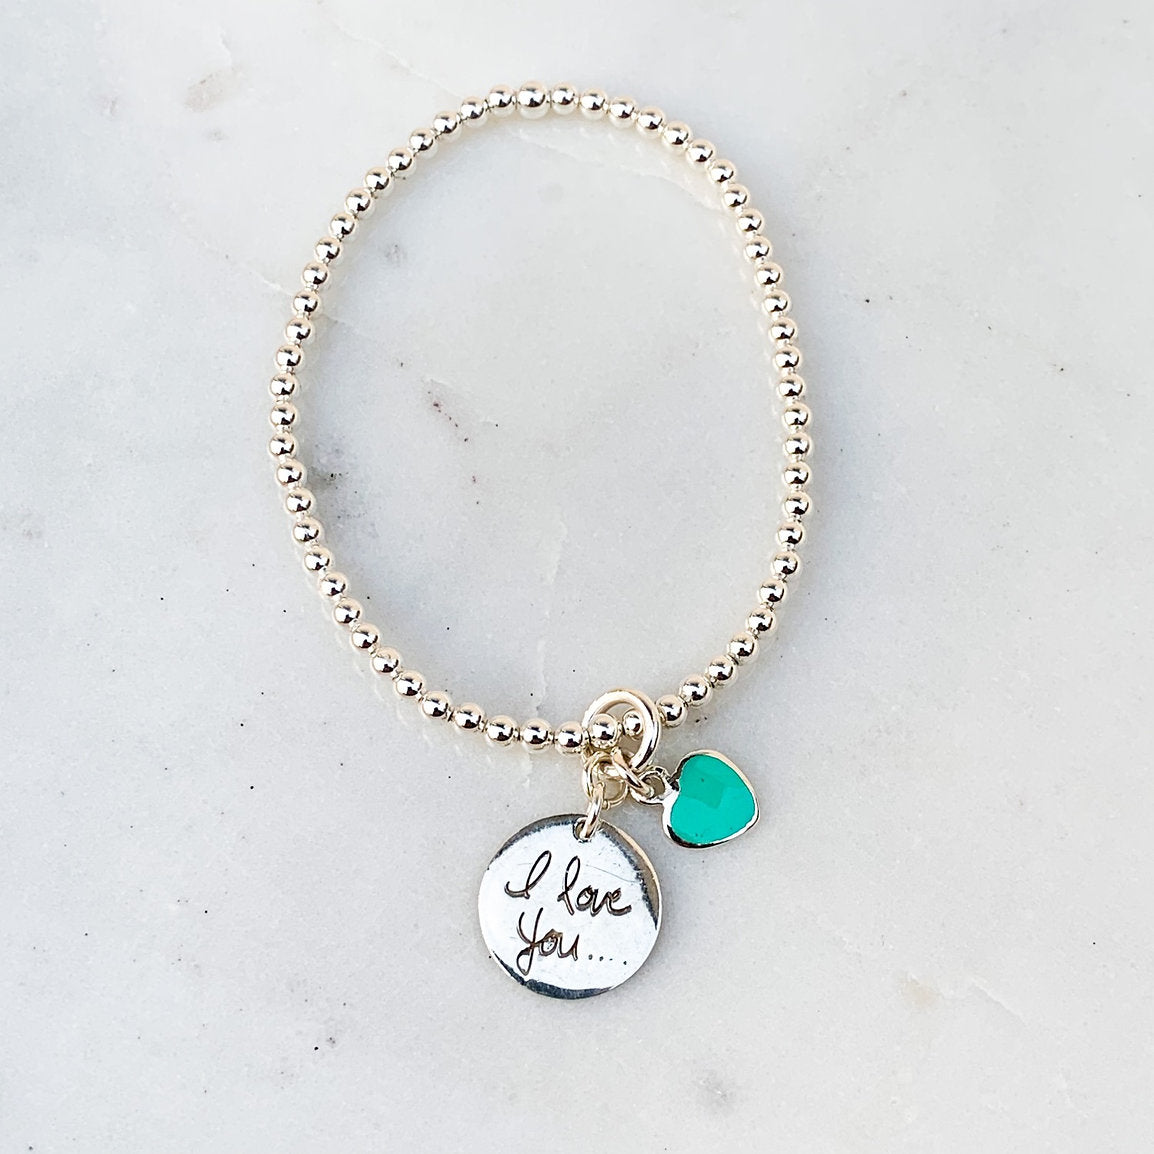 Love is in the Air Bracelets